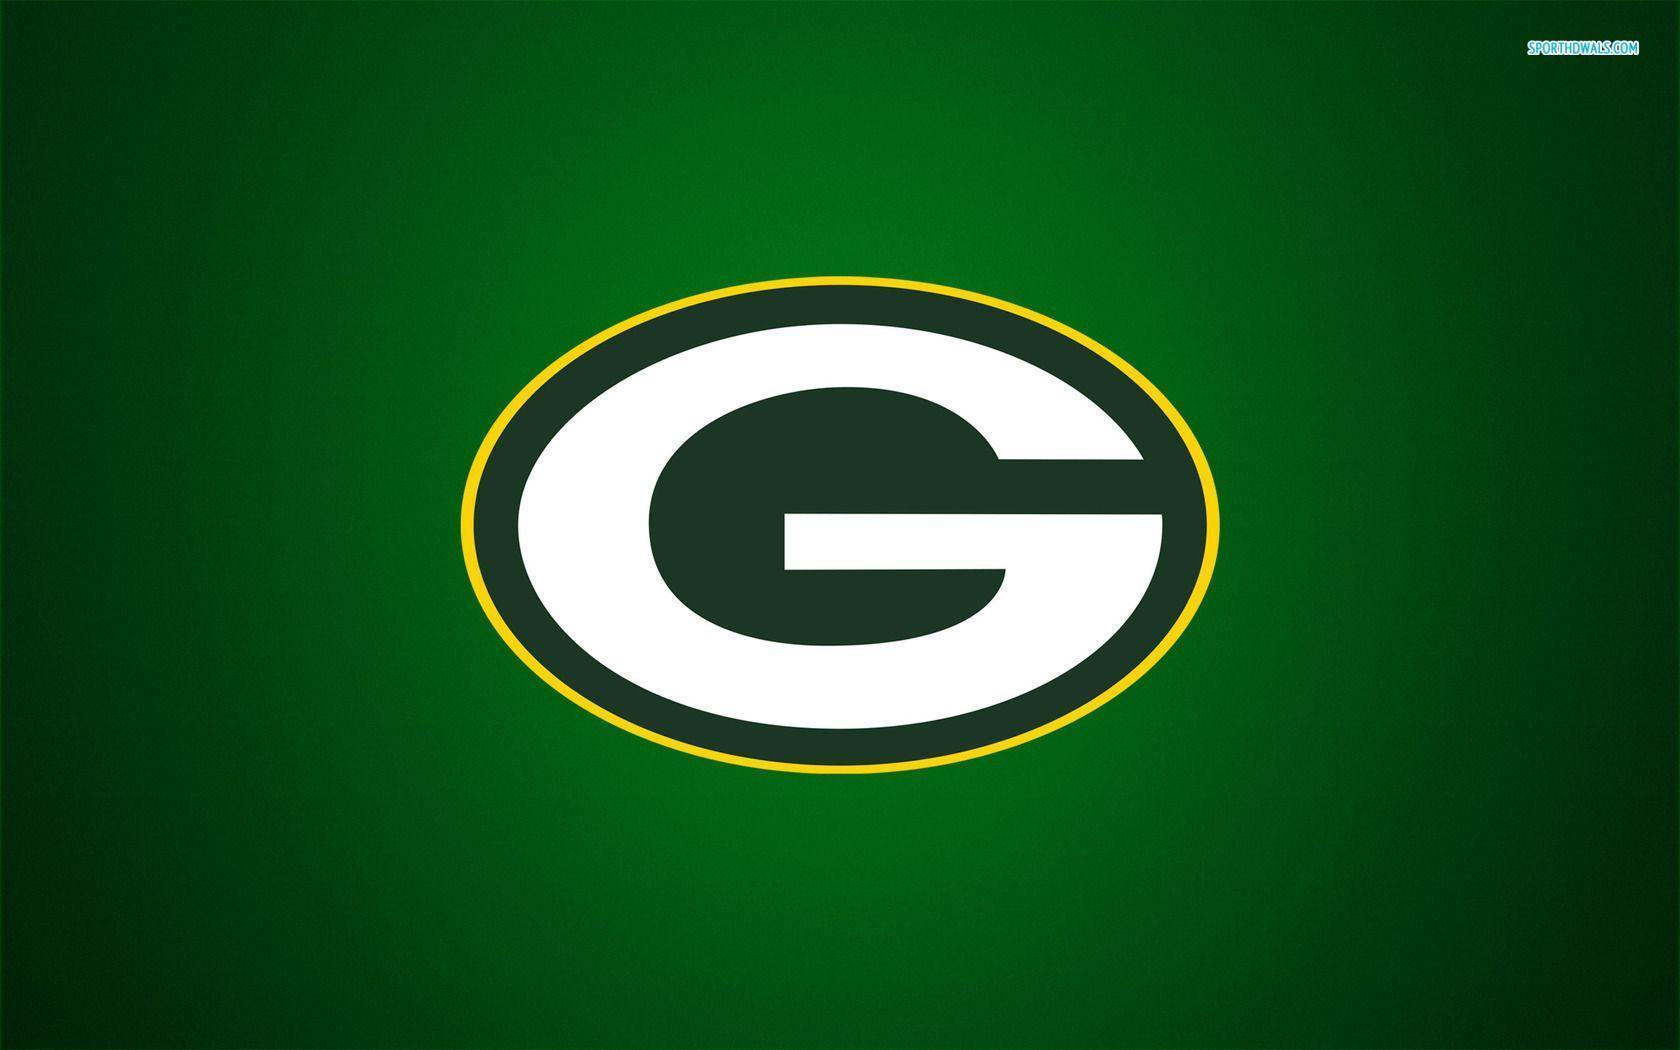 greenbay pics. Green Bay Packers wallpaper 1680x1050. Places to